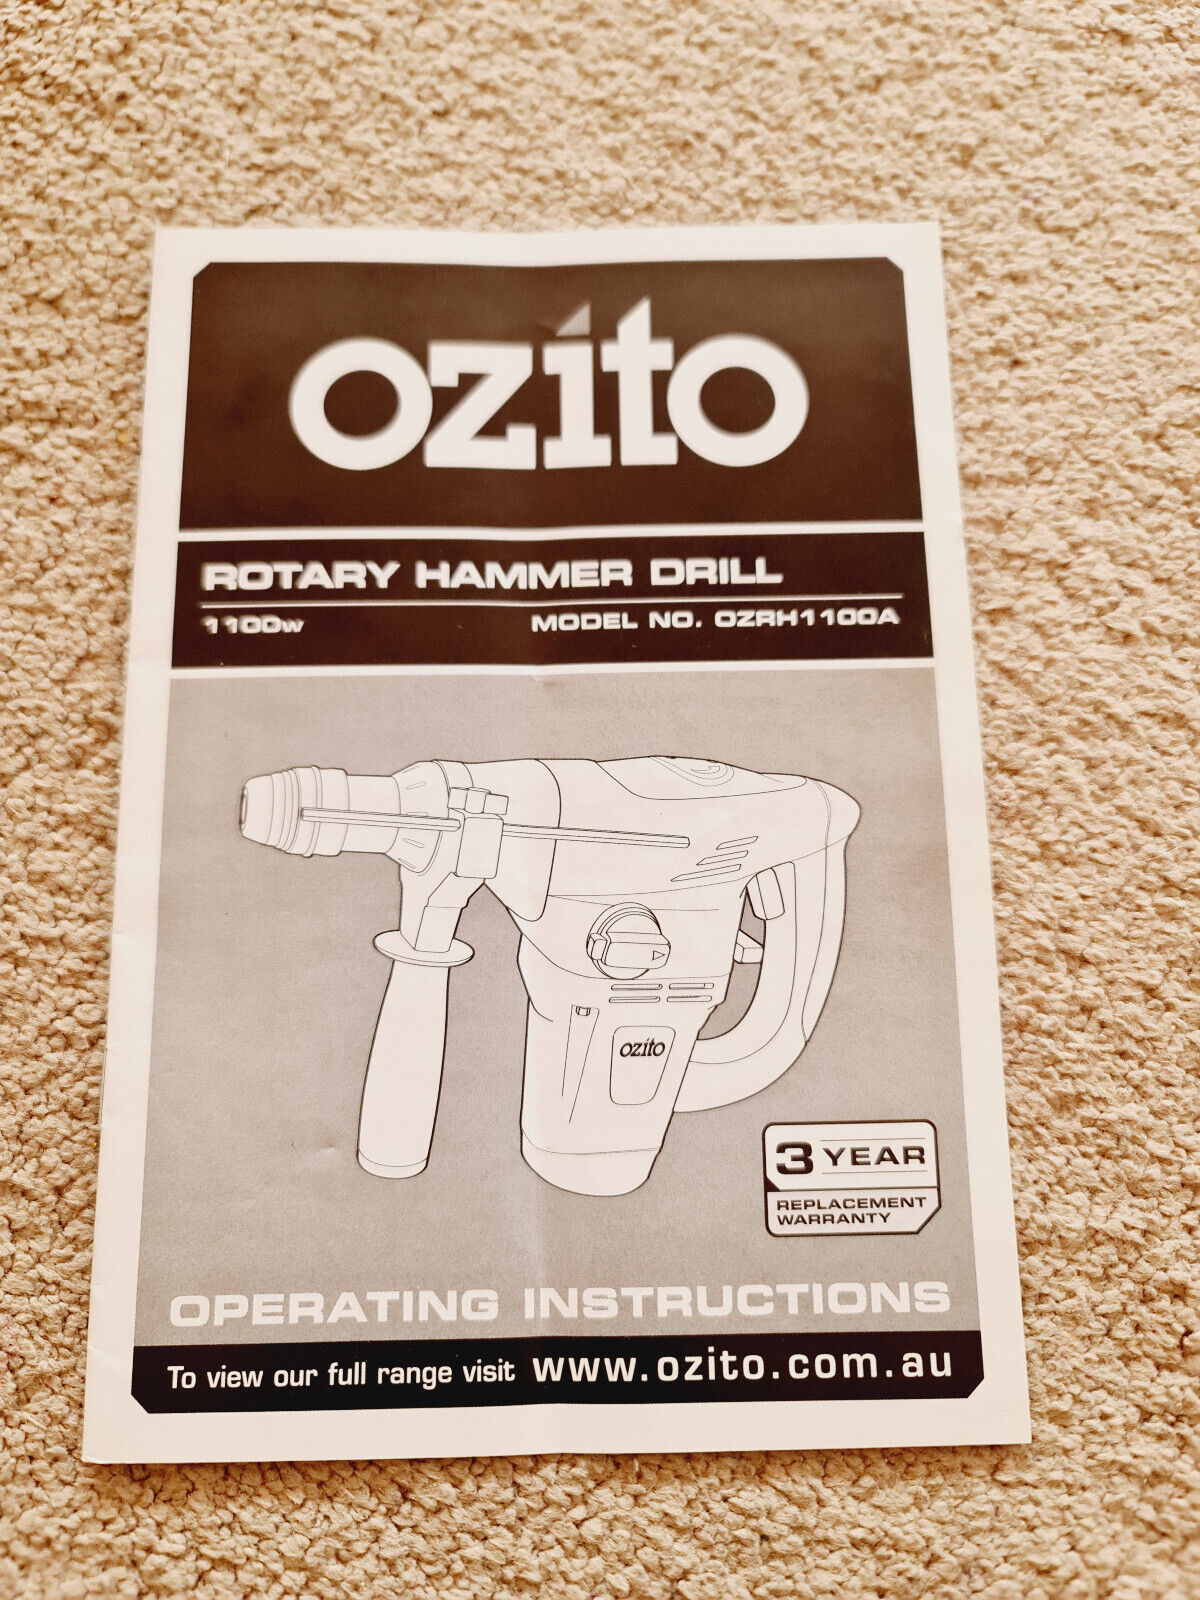 Vintage Ozito Rotary Hammer Drill User Guide manual book